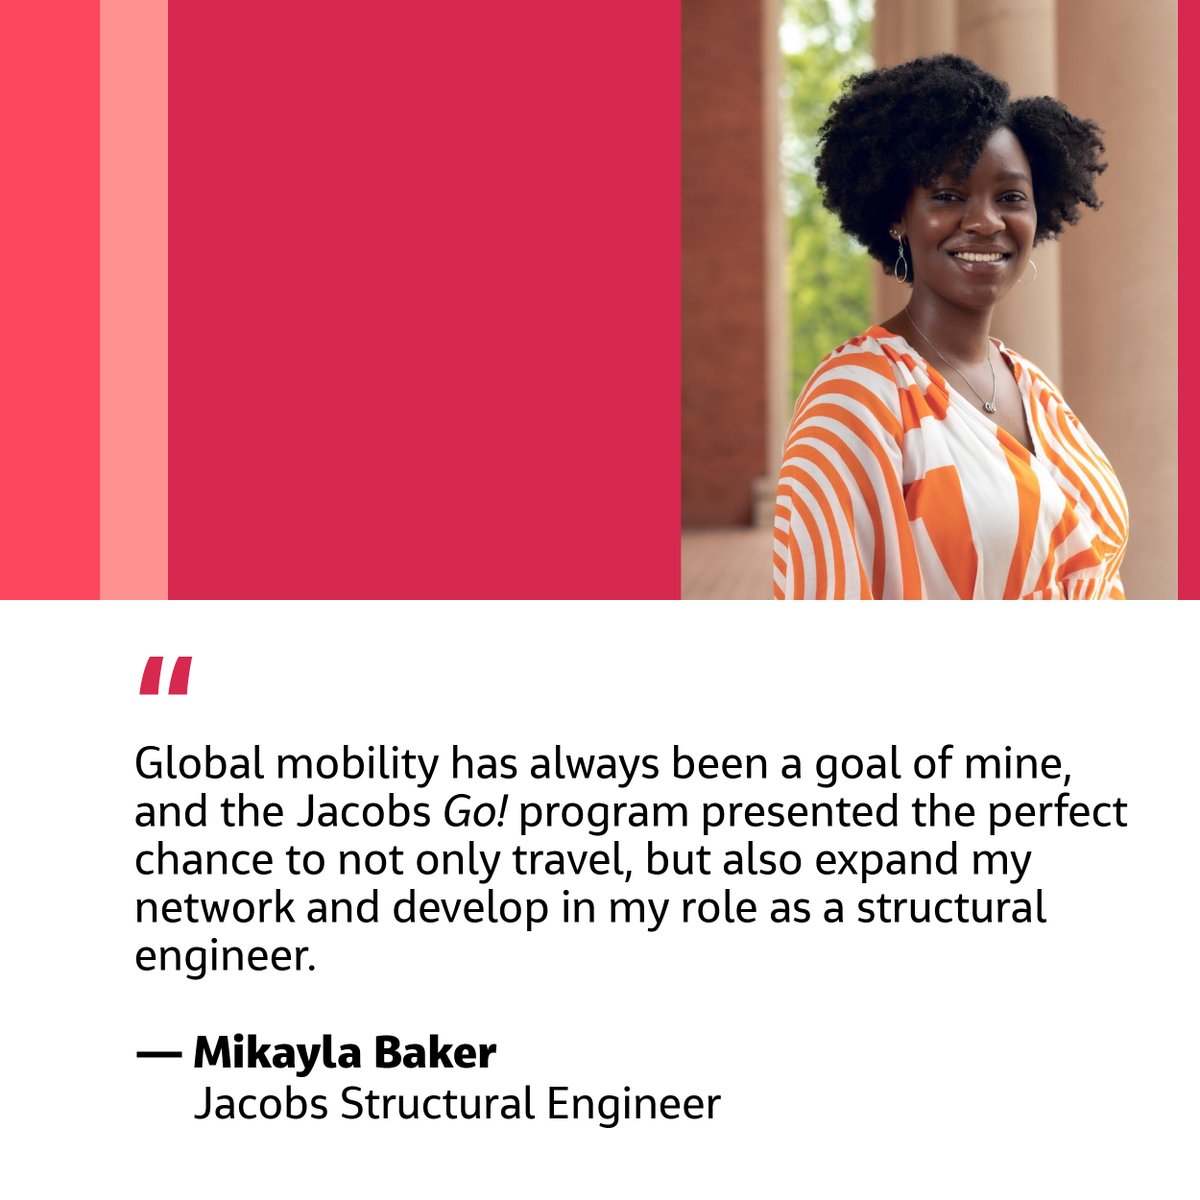 Learning about local culture, exploring the city, trying out local cuisines & bonding with the team on-site – all while advancing her skills and developing in her role. Read Mikayla Baker’s Jacobs Go! story ⬇️ jcob.co/ziSG50RBbr2